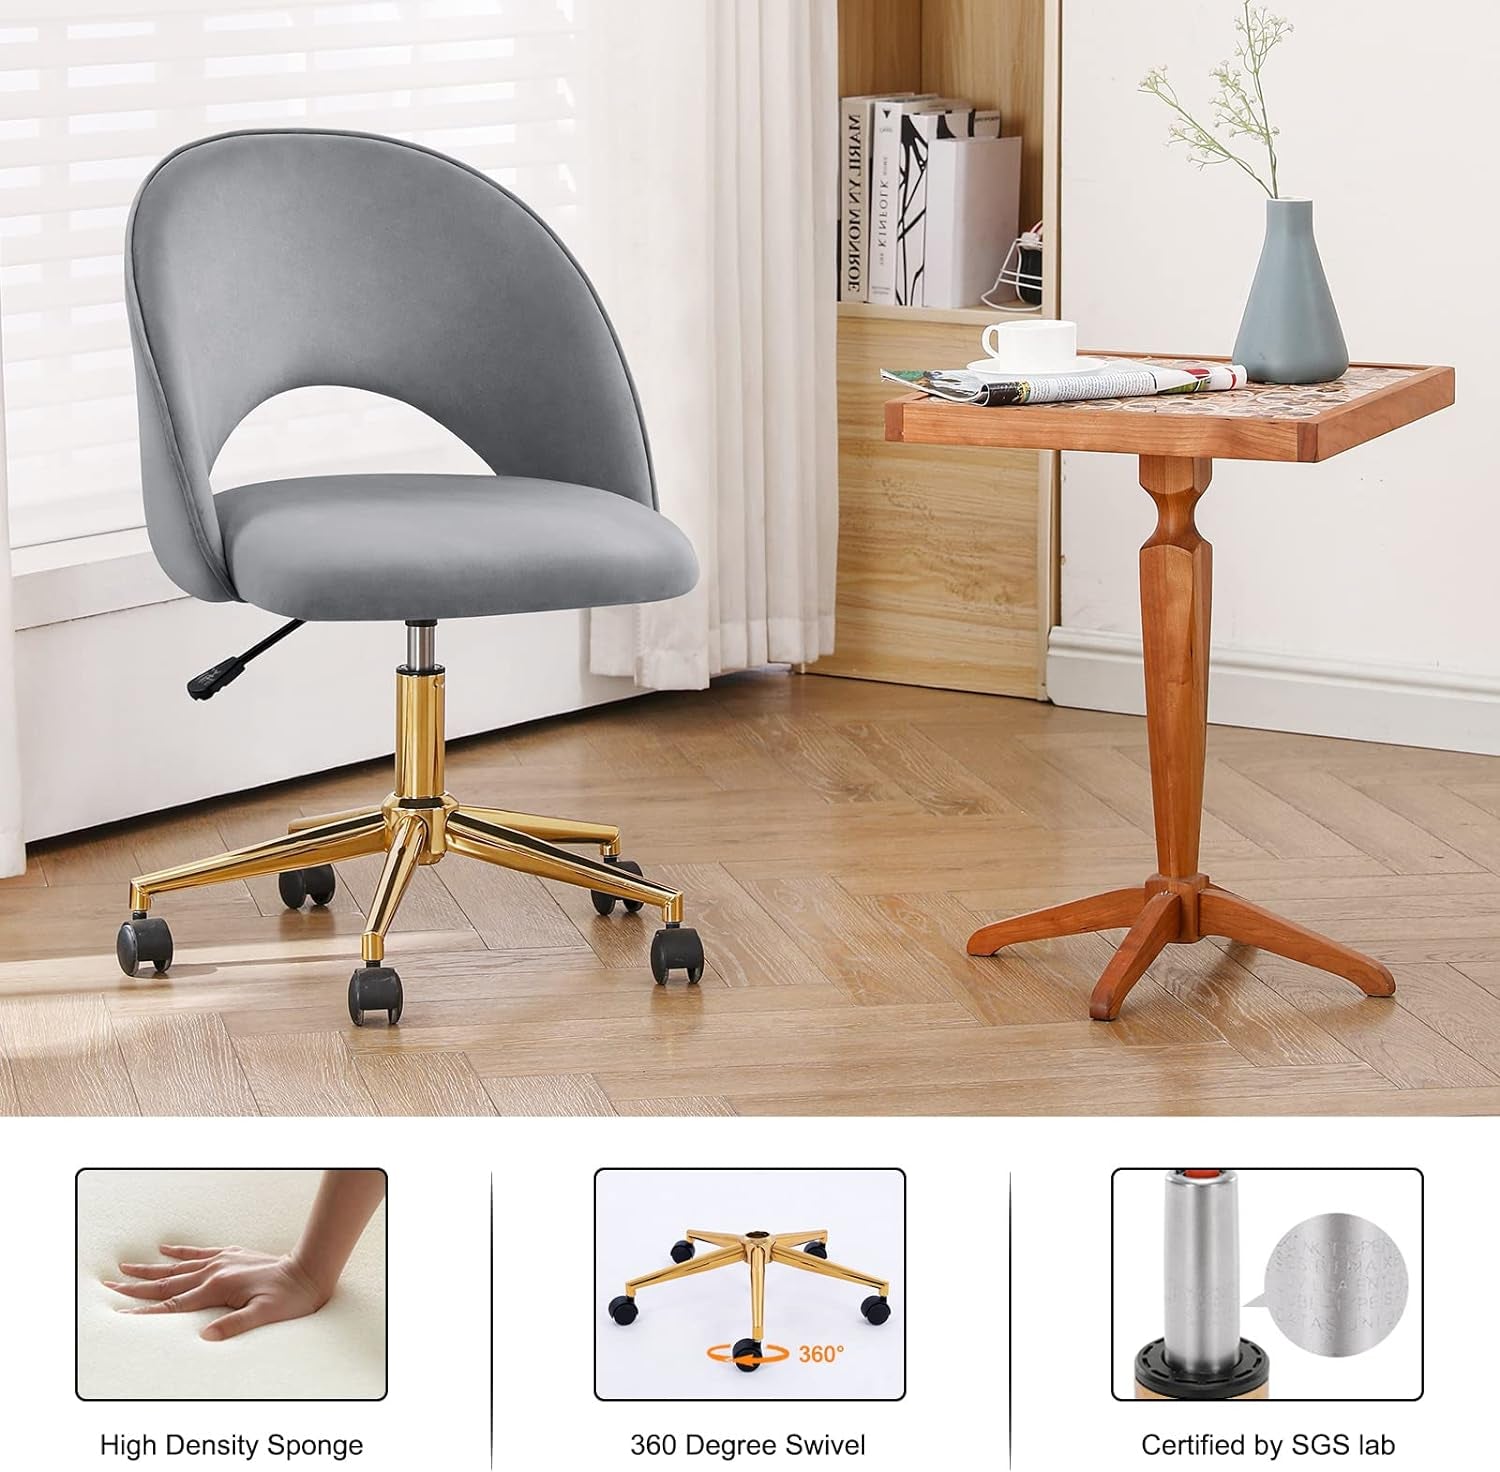 Home Office Chair Modern Swivel Vanity Chair with Gold Base Armless Cute Task Chair Mid-Back Desk Chair with Wheels for Dorm Living Room Bedroom Studying Room Vanity Room(Light Grey)